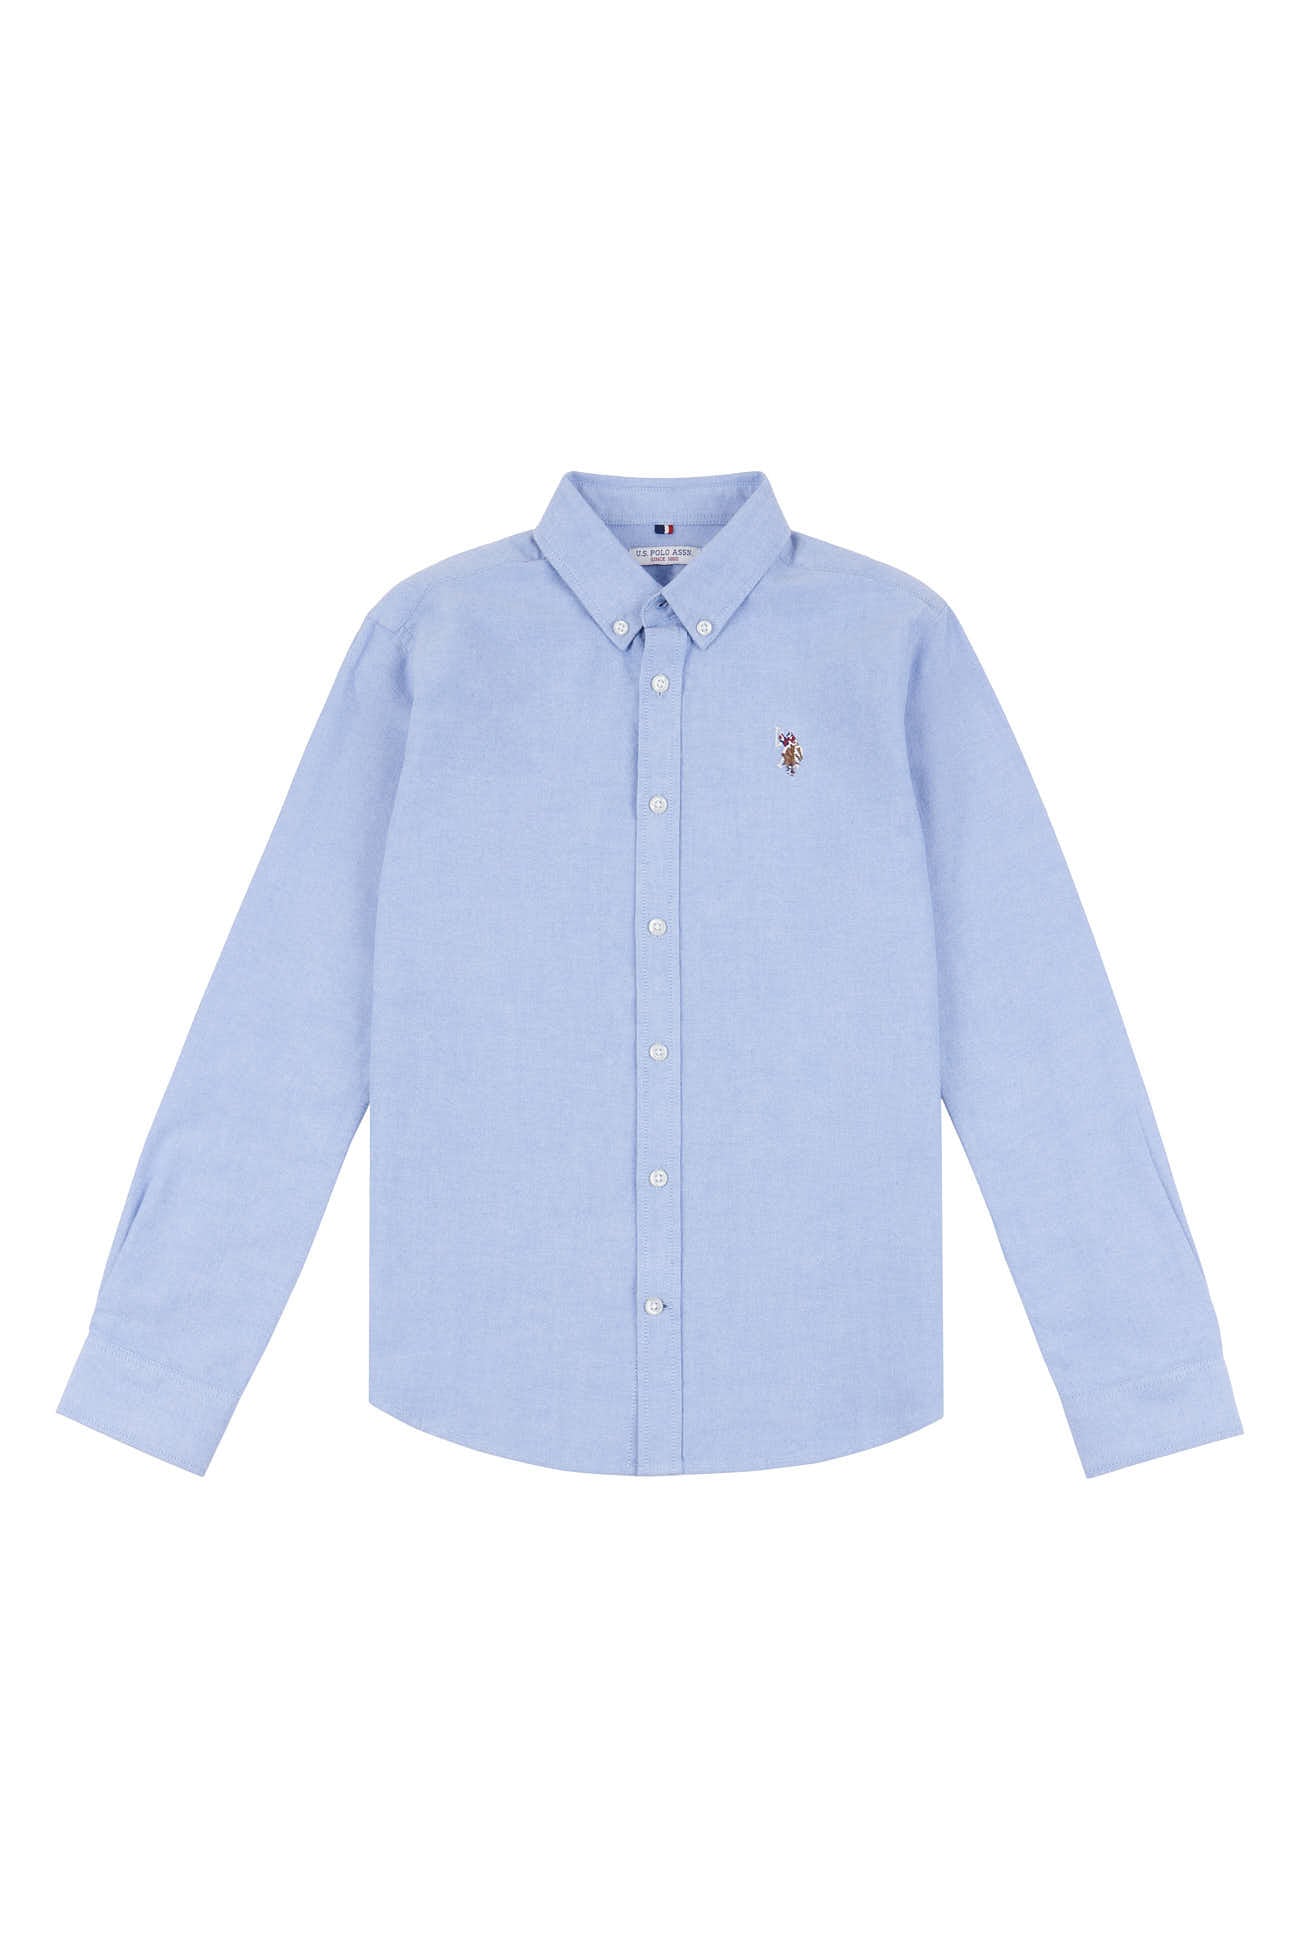 Boys Lifestyle Peached Oxford Shirt in Blue Yonder